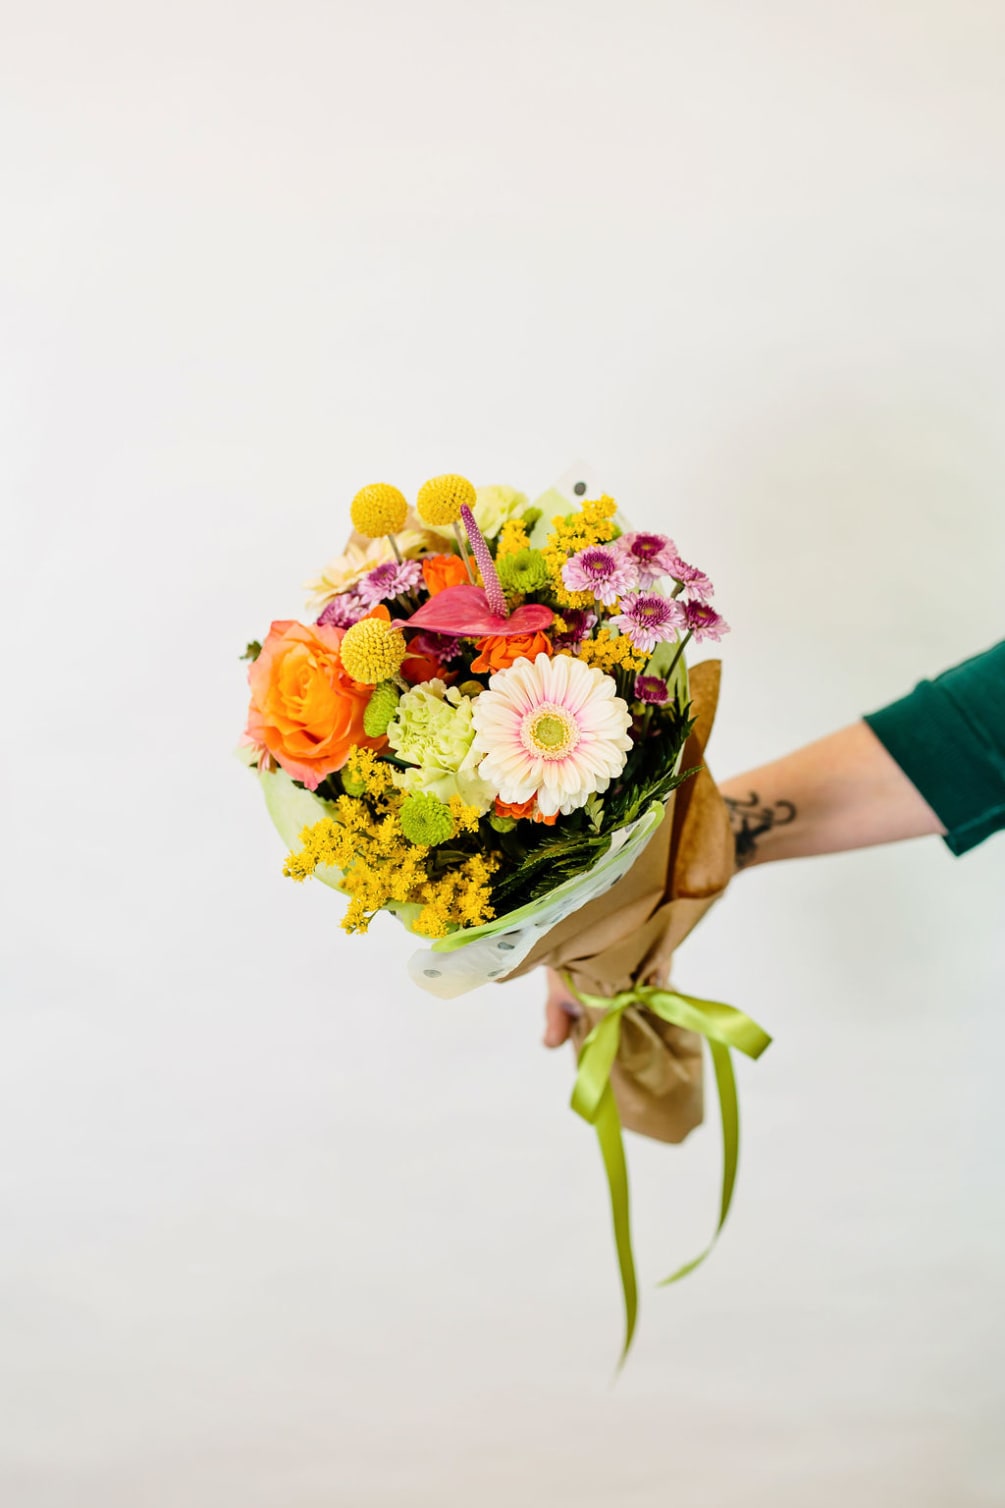 This hand tied bouquet is a collect of bright and cheery seasonal